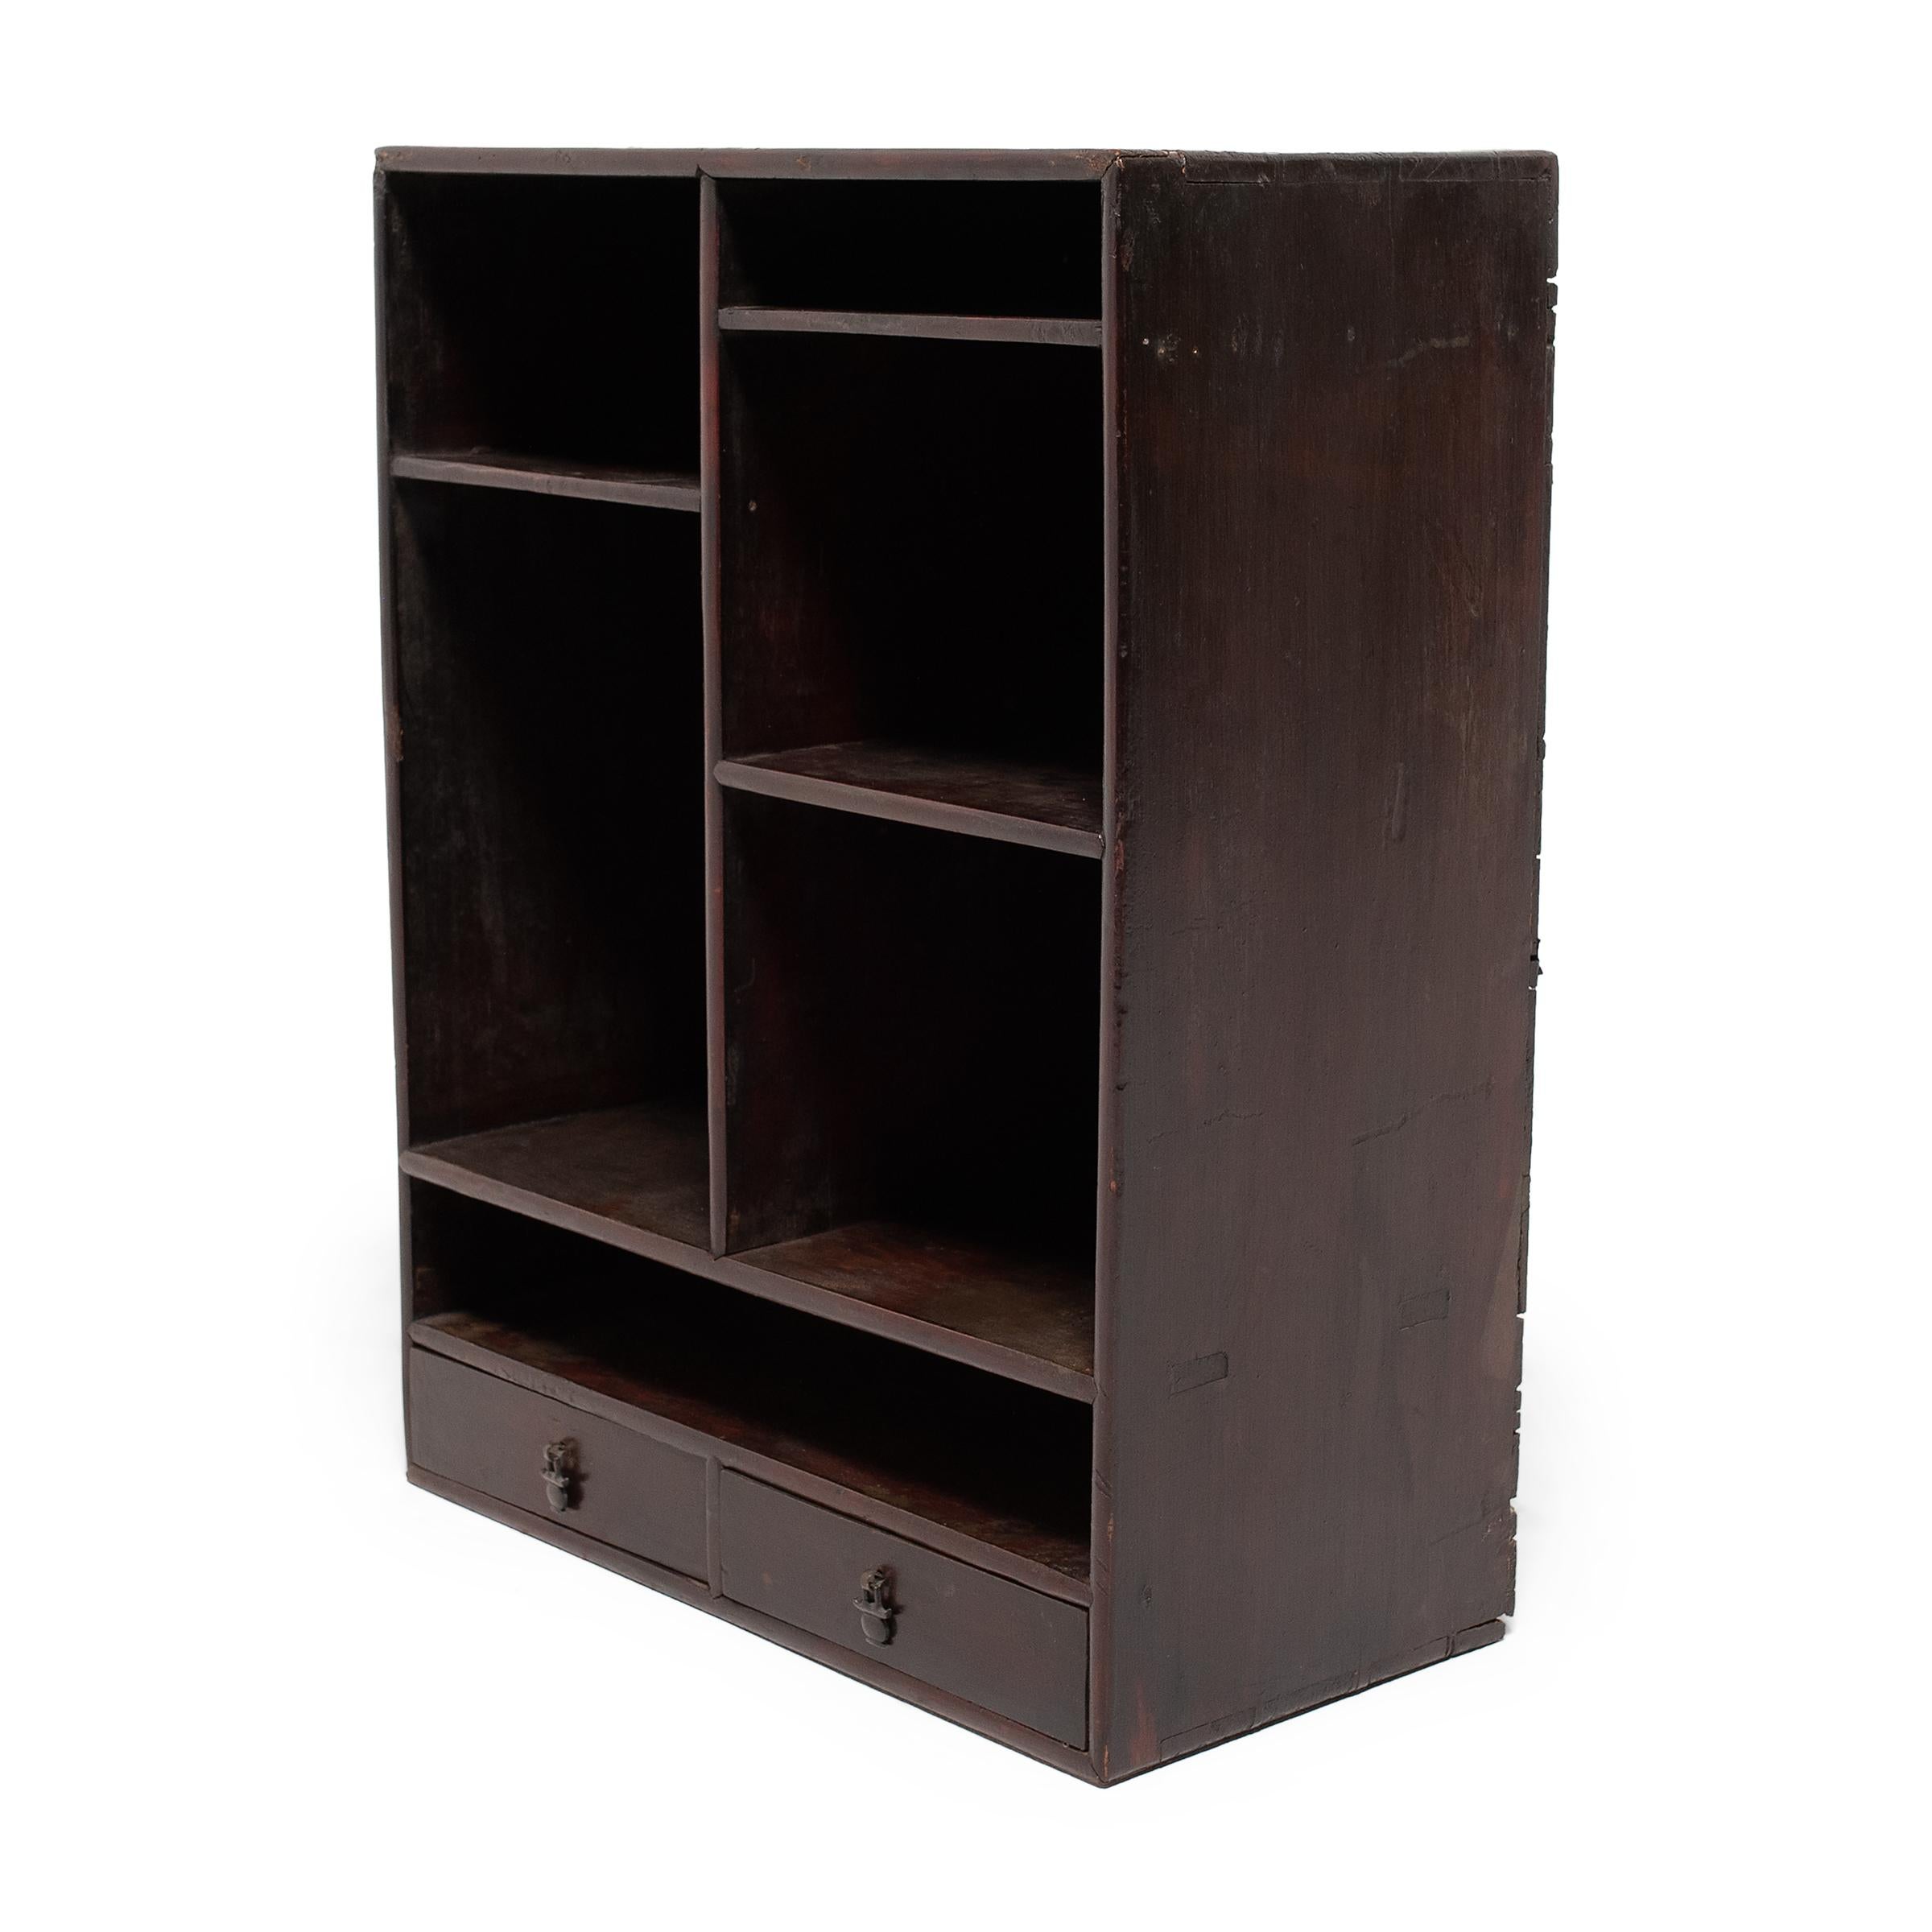 This provincial collector's shelf from the early 20th century once stood in an office or home studio, displaying a curated collection of books, accessories, and precious objects. The low shelf is simply designed with six open compartments of varying